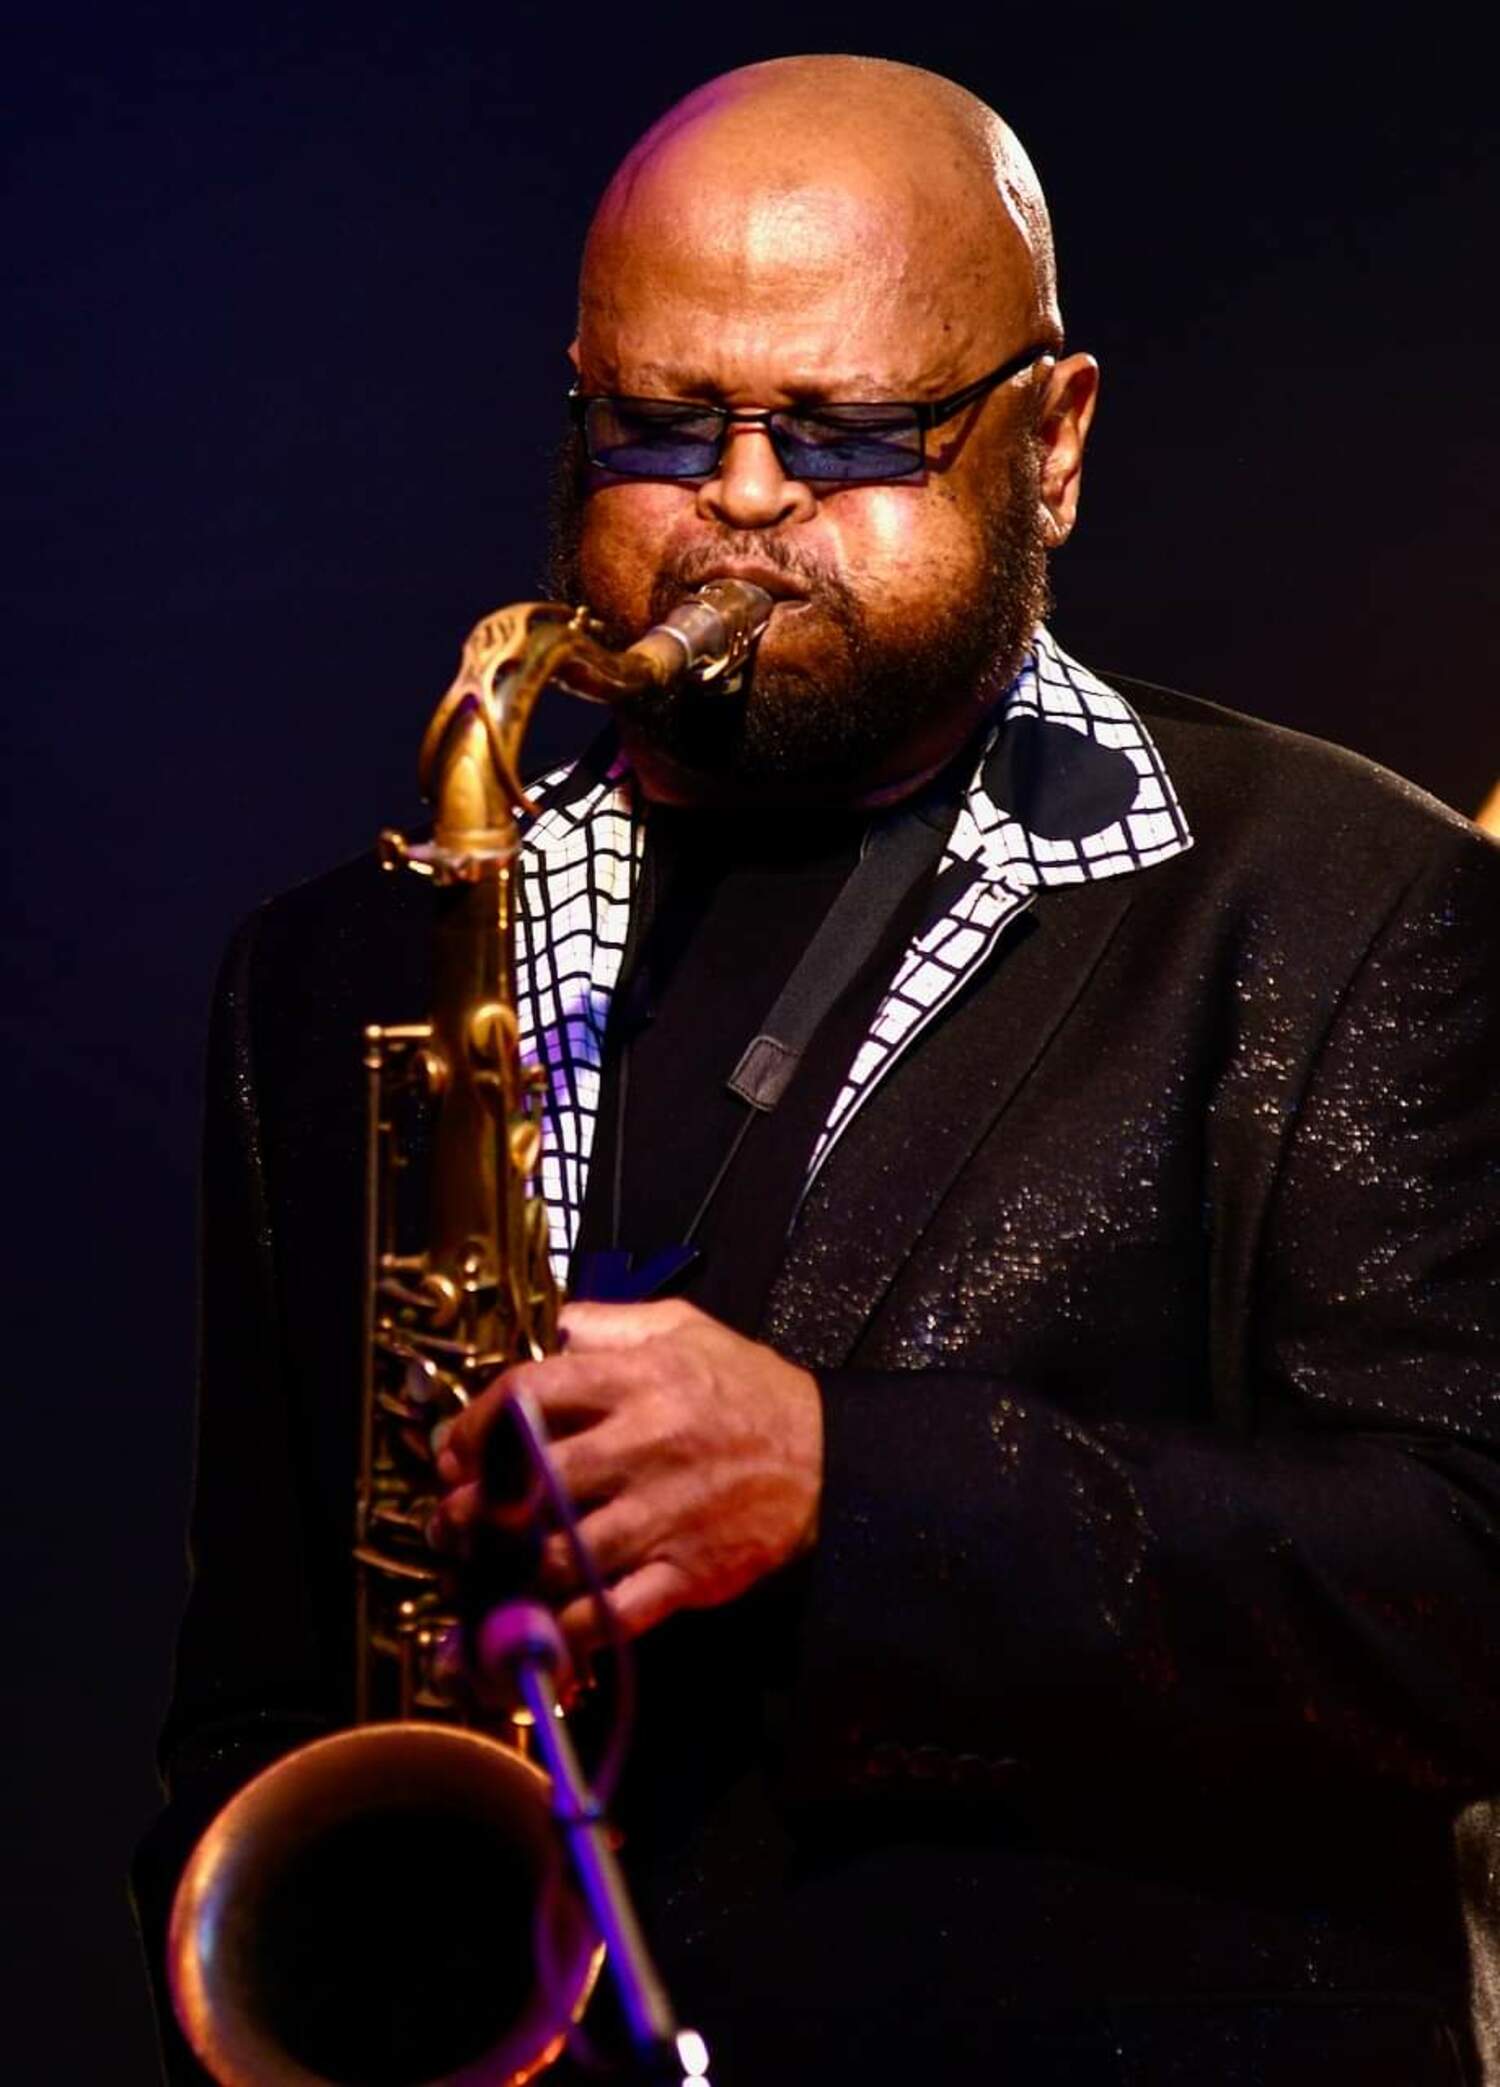 Jazz saxophonist Azar Lawrence performs at Southampton Arts Center on February 17. COURTESY THE ARTIST